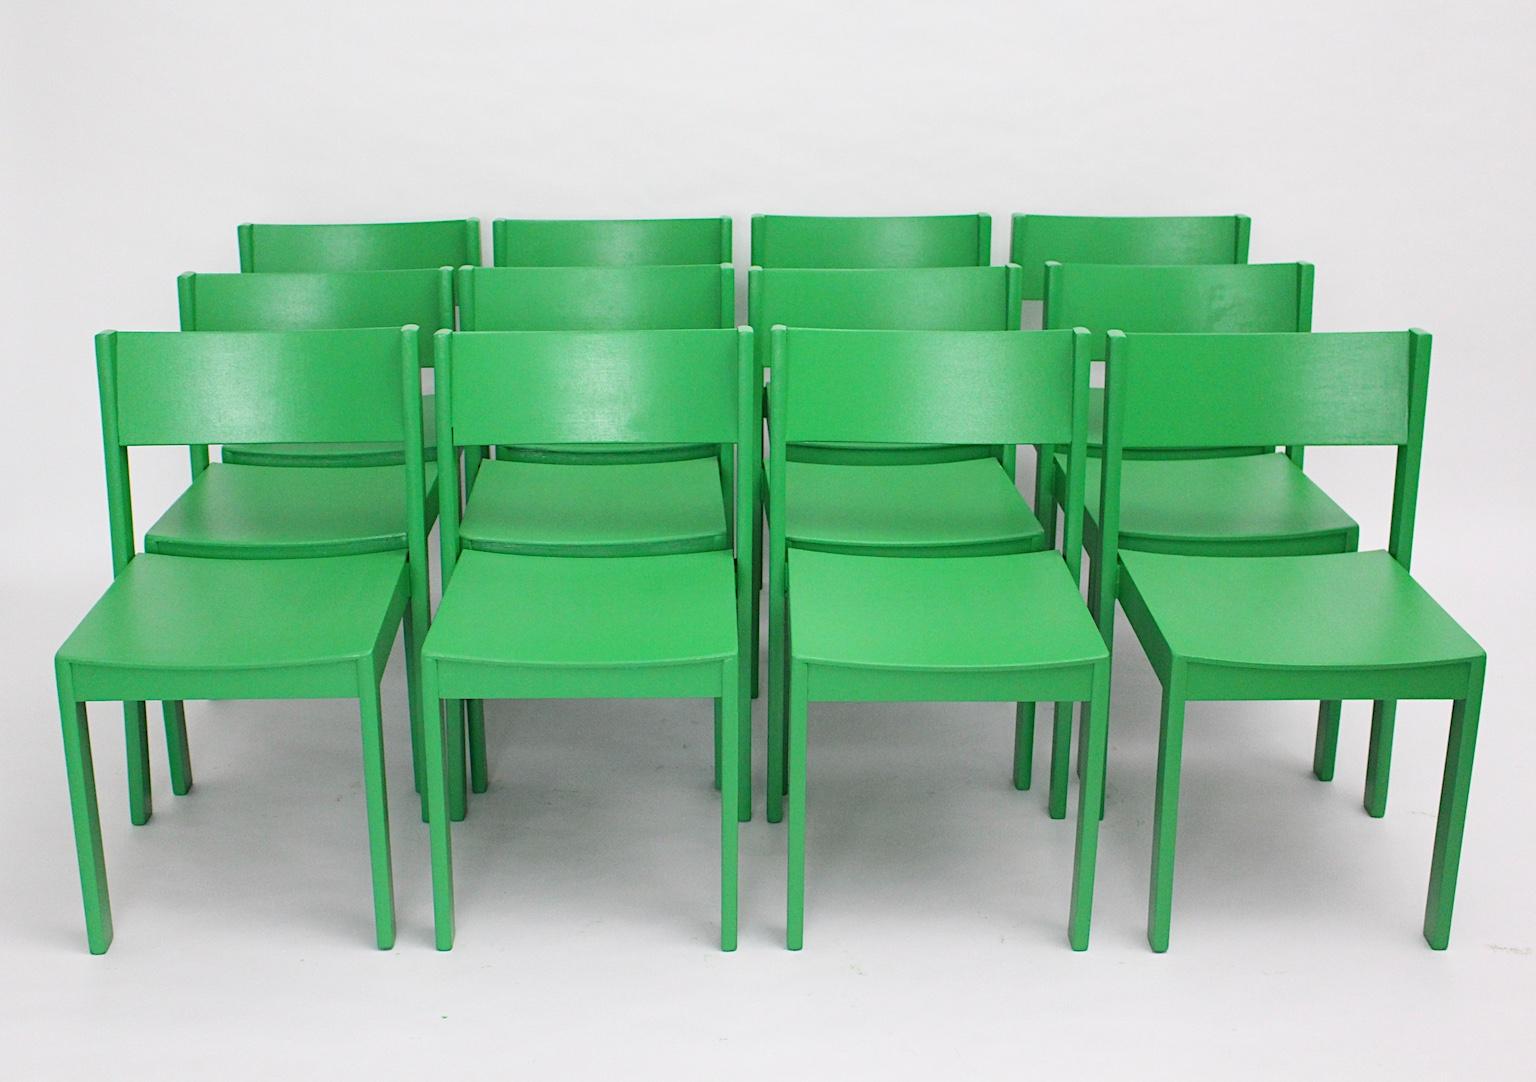 Mid Century Modern set of 12 green vintage Mid-Century Modern dining chairs designed and manufactured 1950s in Austria.
The vintage dining chairs were made out of beech and plywood, while the surface is carefully cleaned and newly green lacquered.